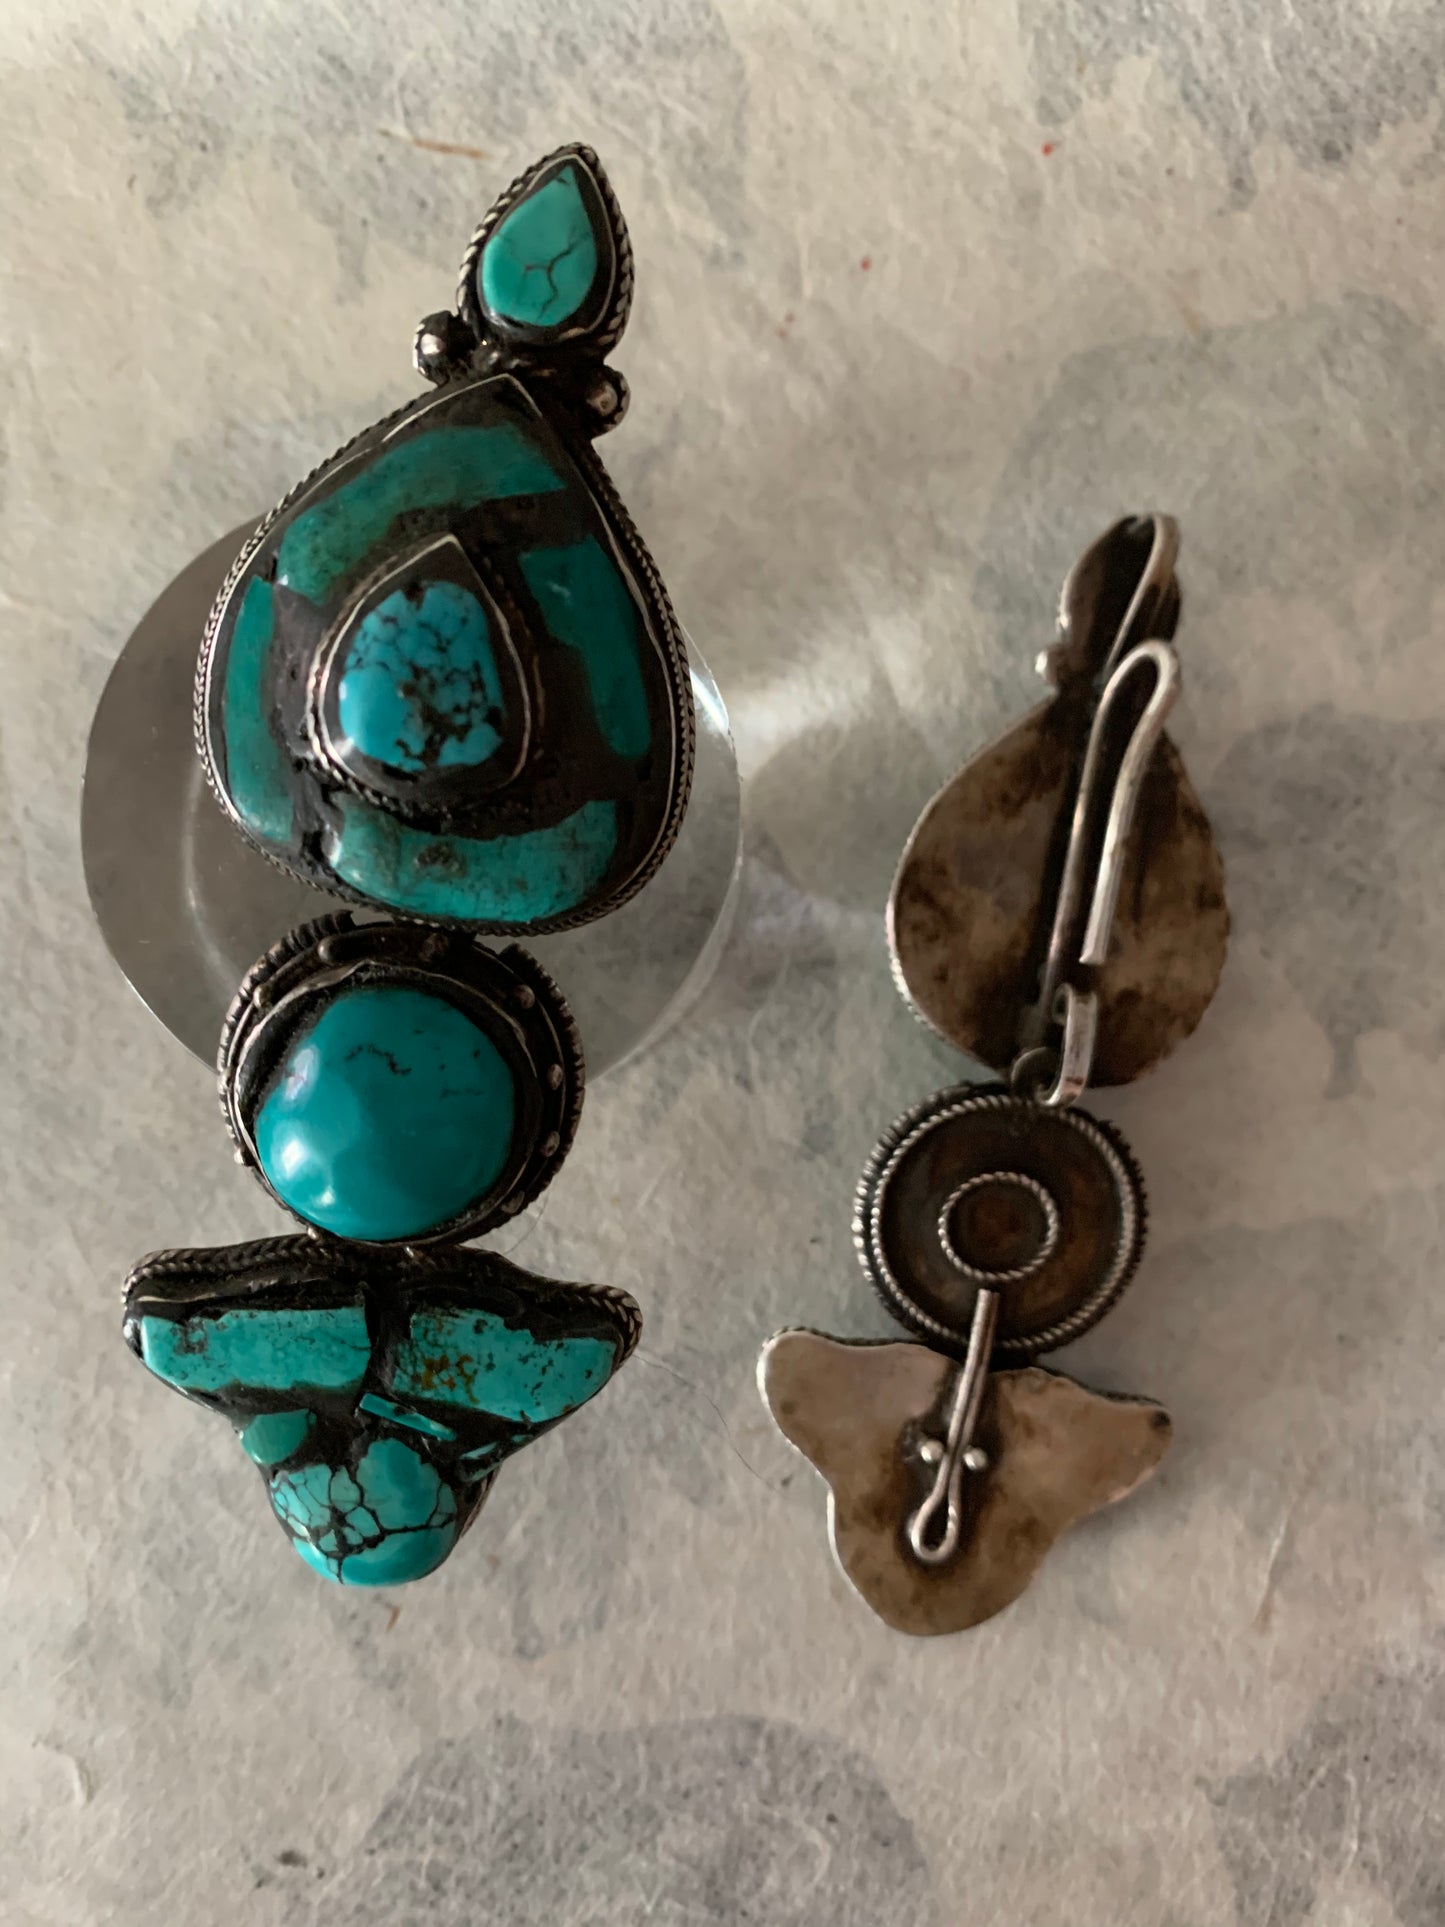 A pair of antique Tibetan turquoise and silver ear pendants / earrings